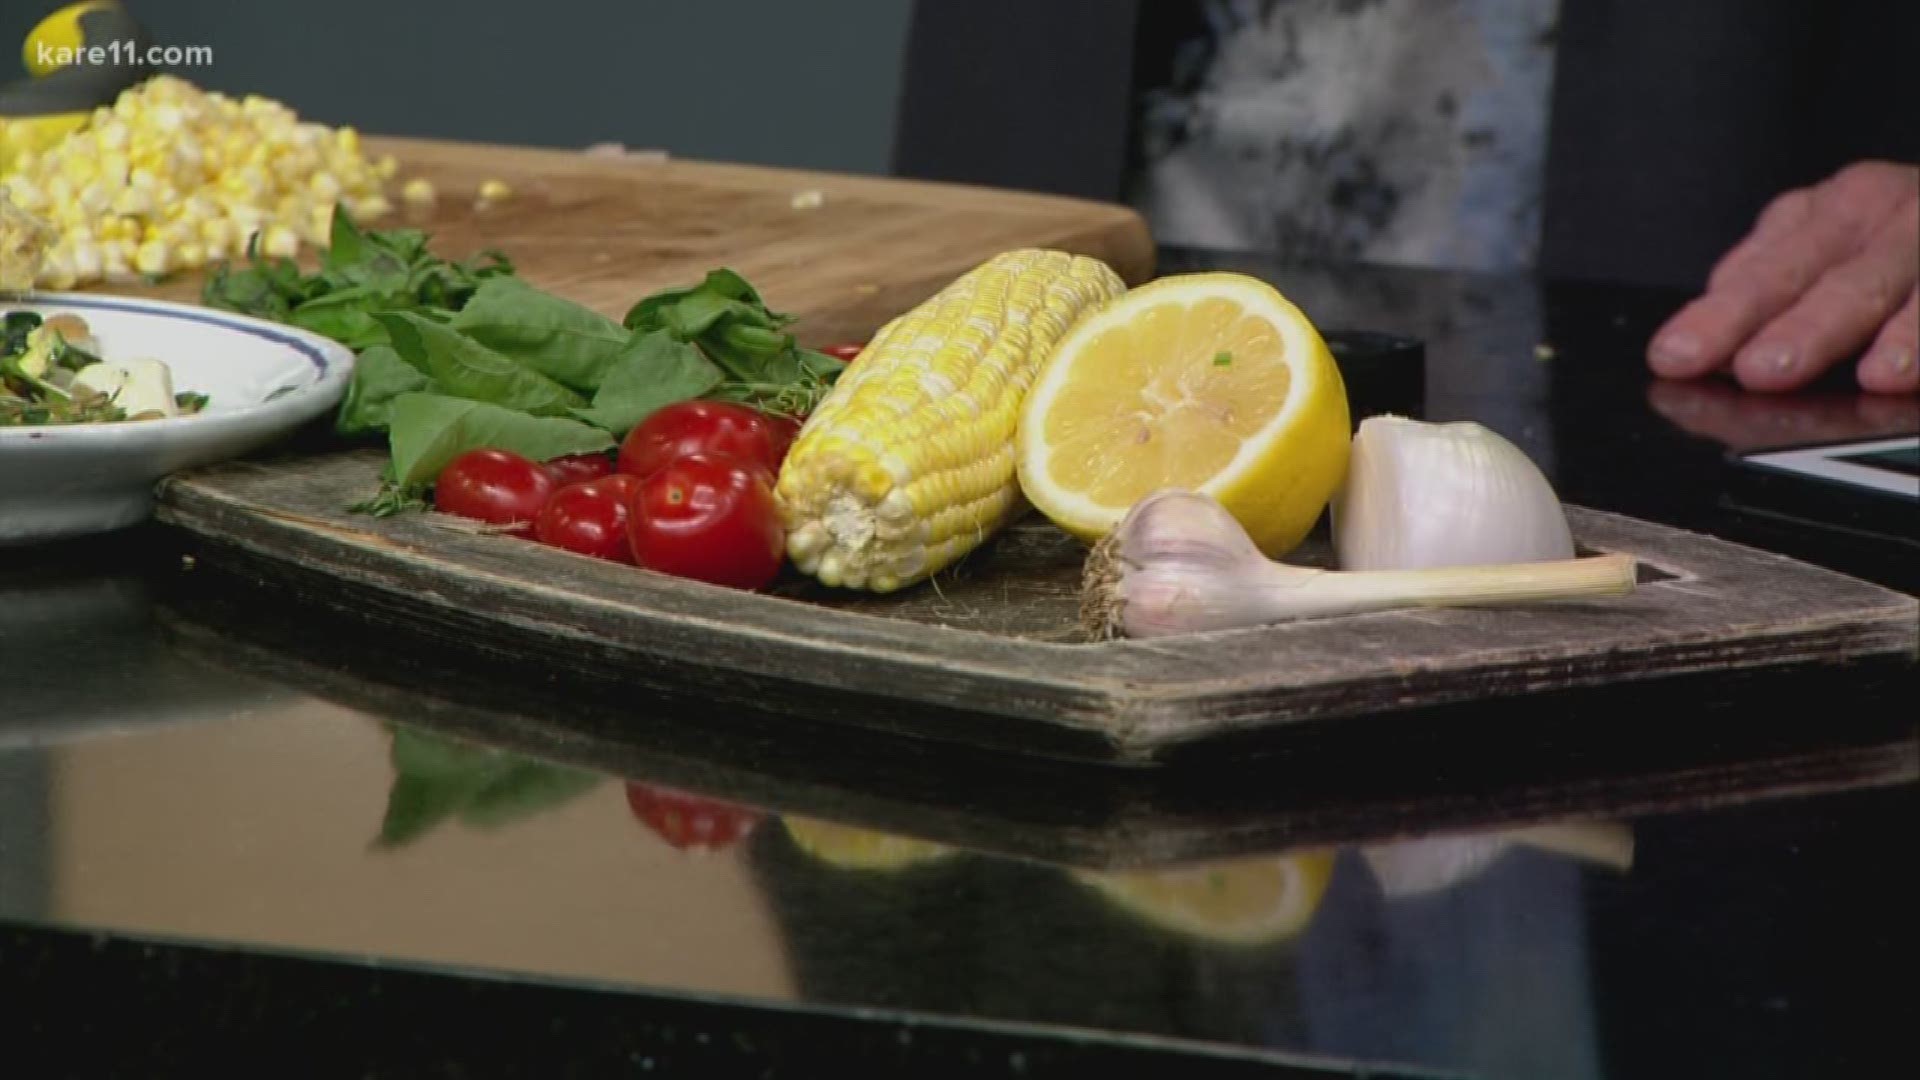 Recipe offers versatility to use corn three times a day!